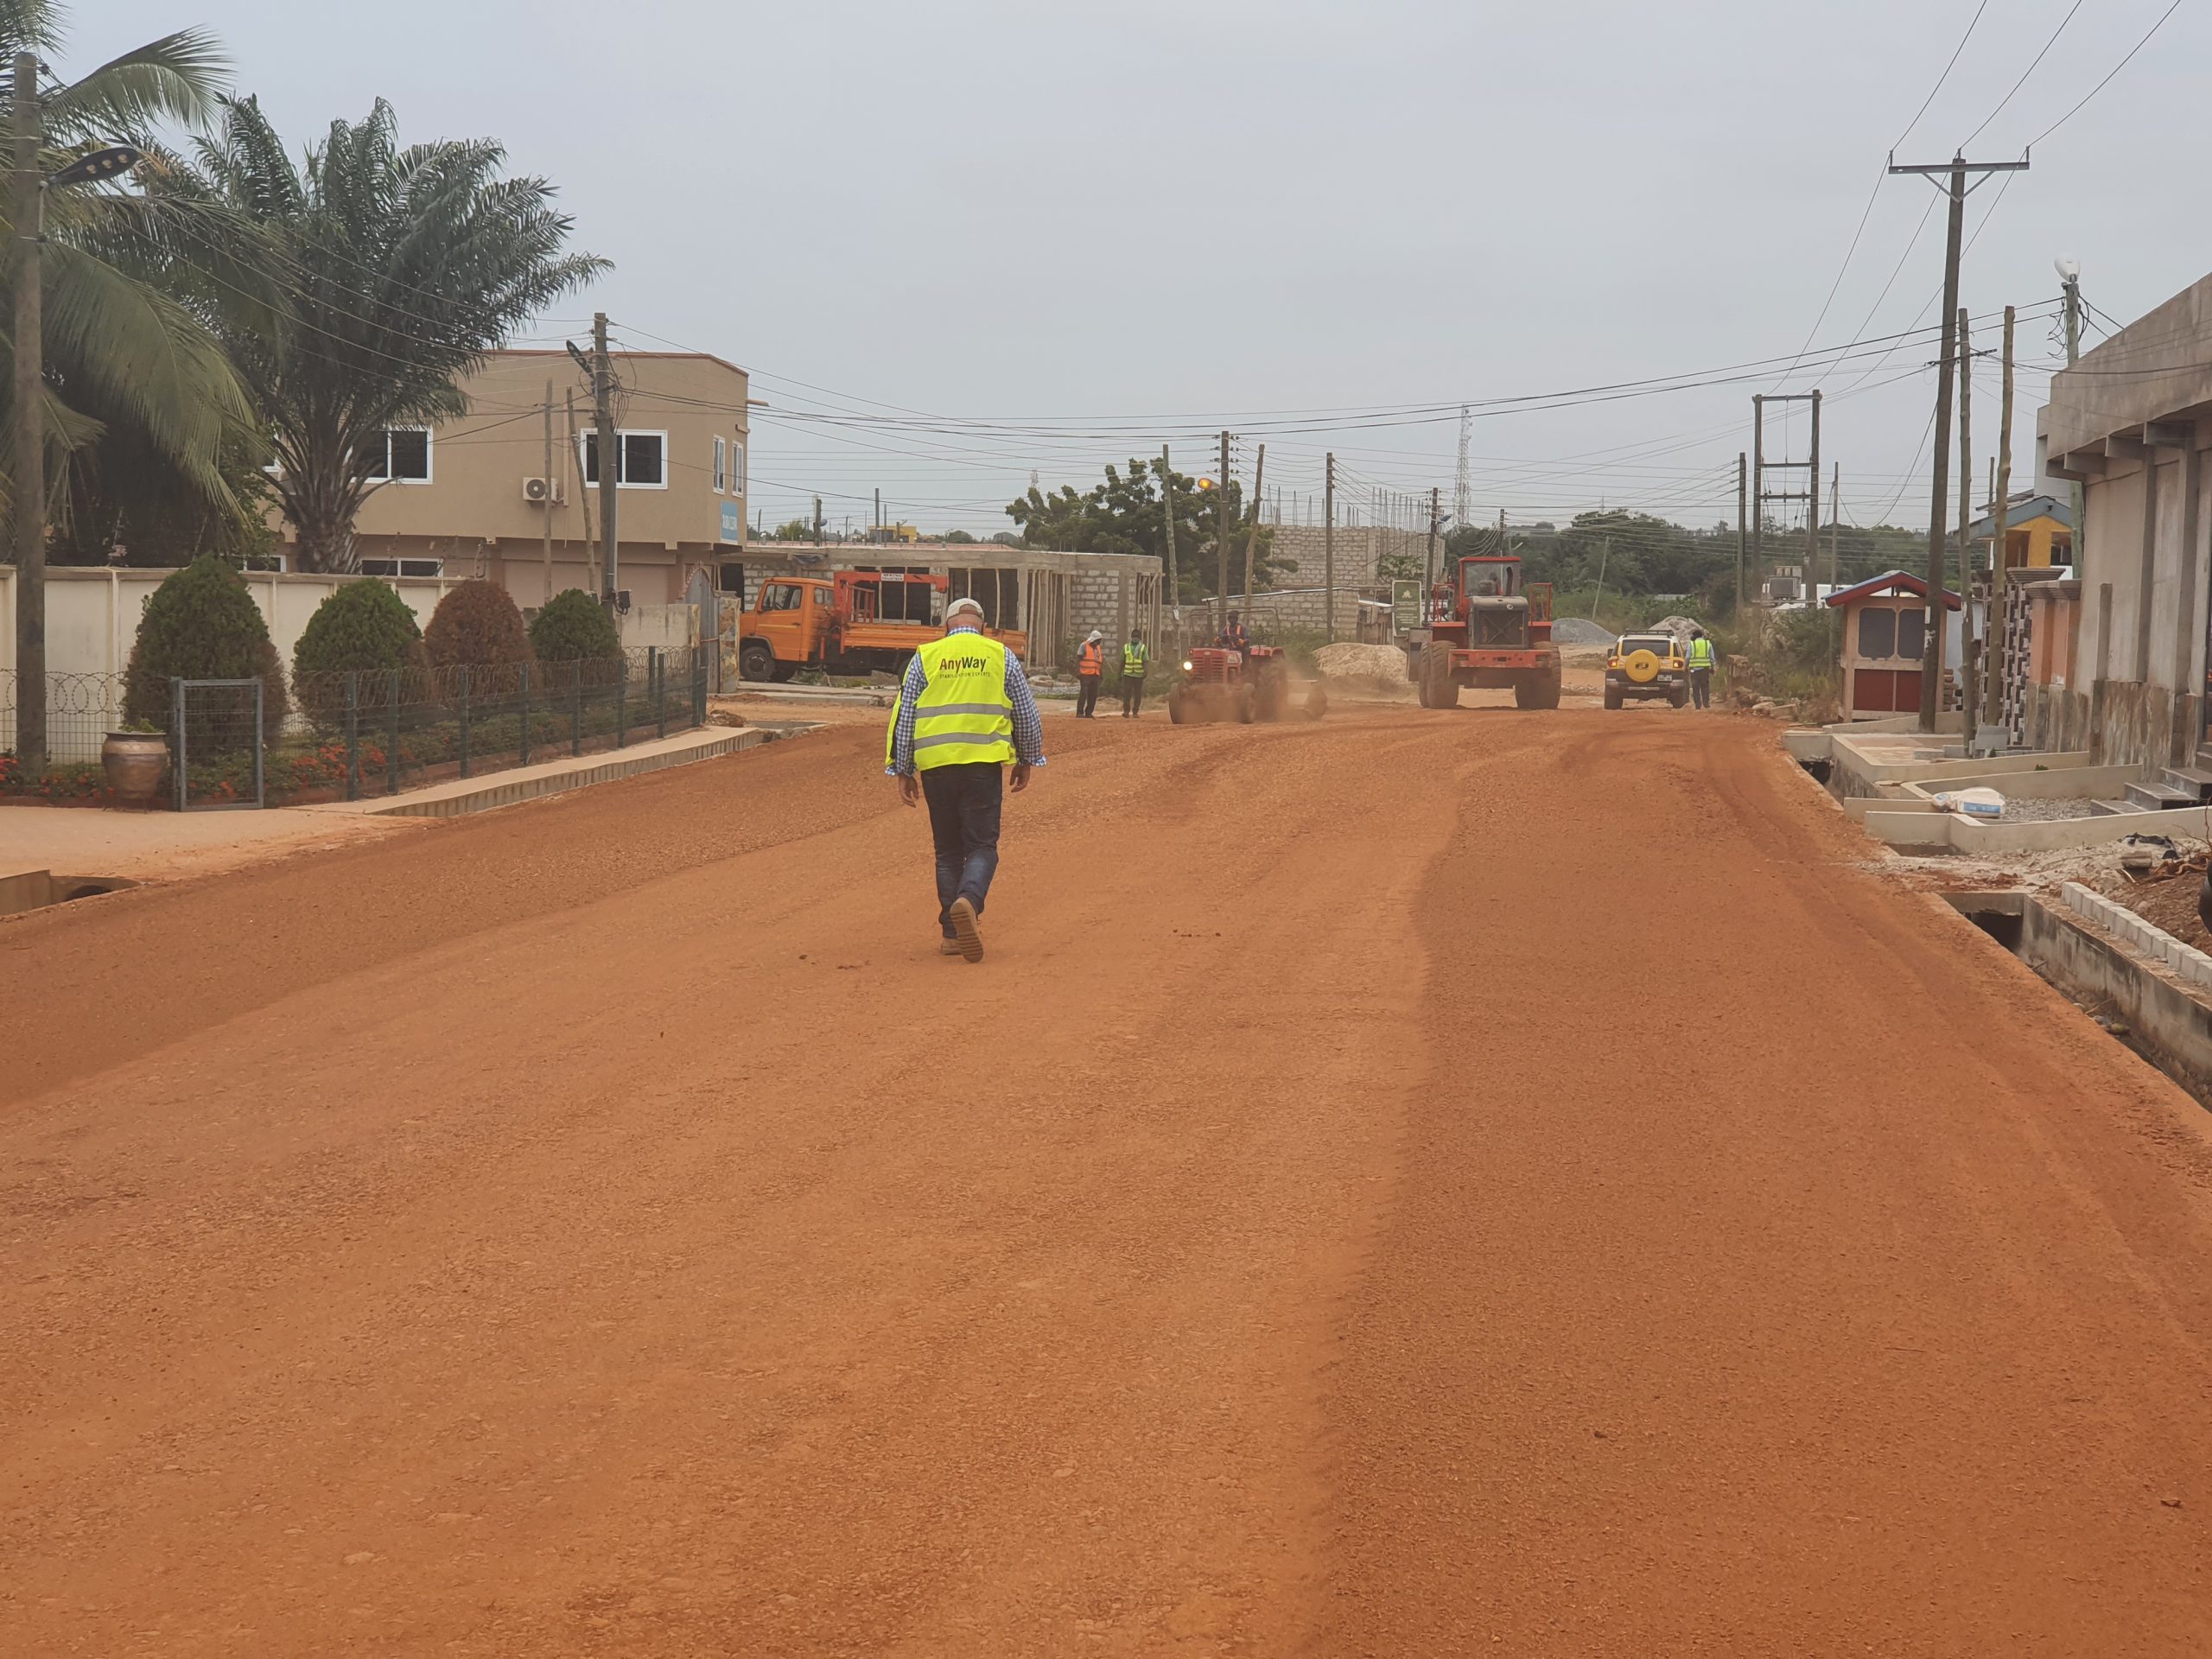 Keeping up with growth in Africa by rehabilitating highly distressed roads